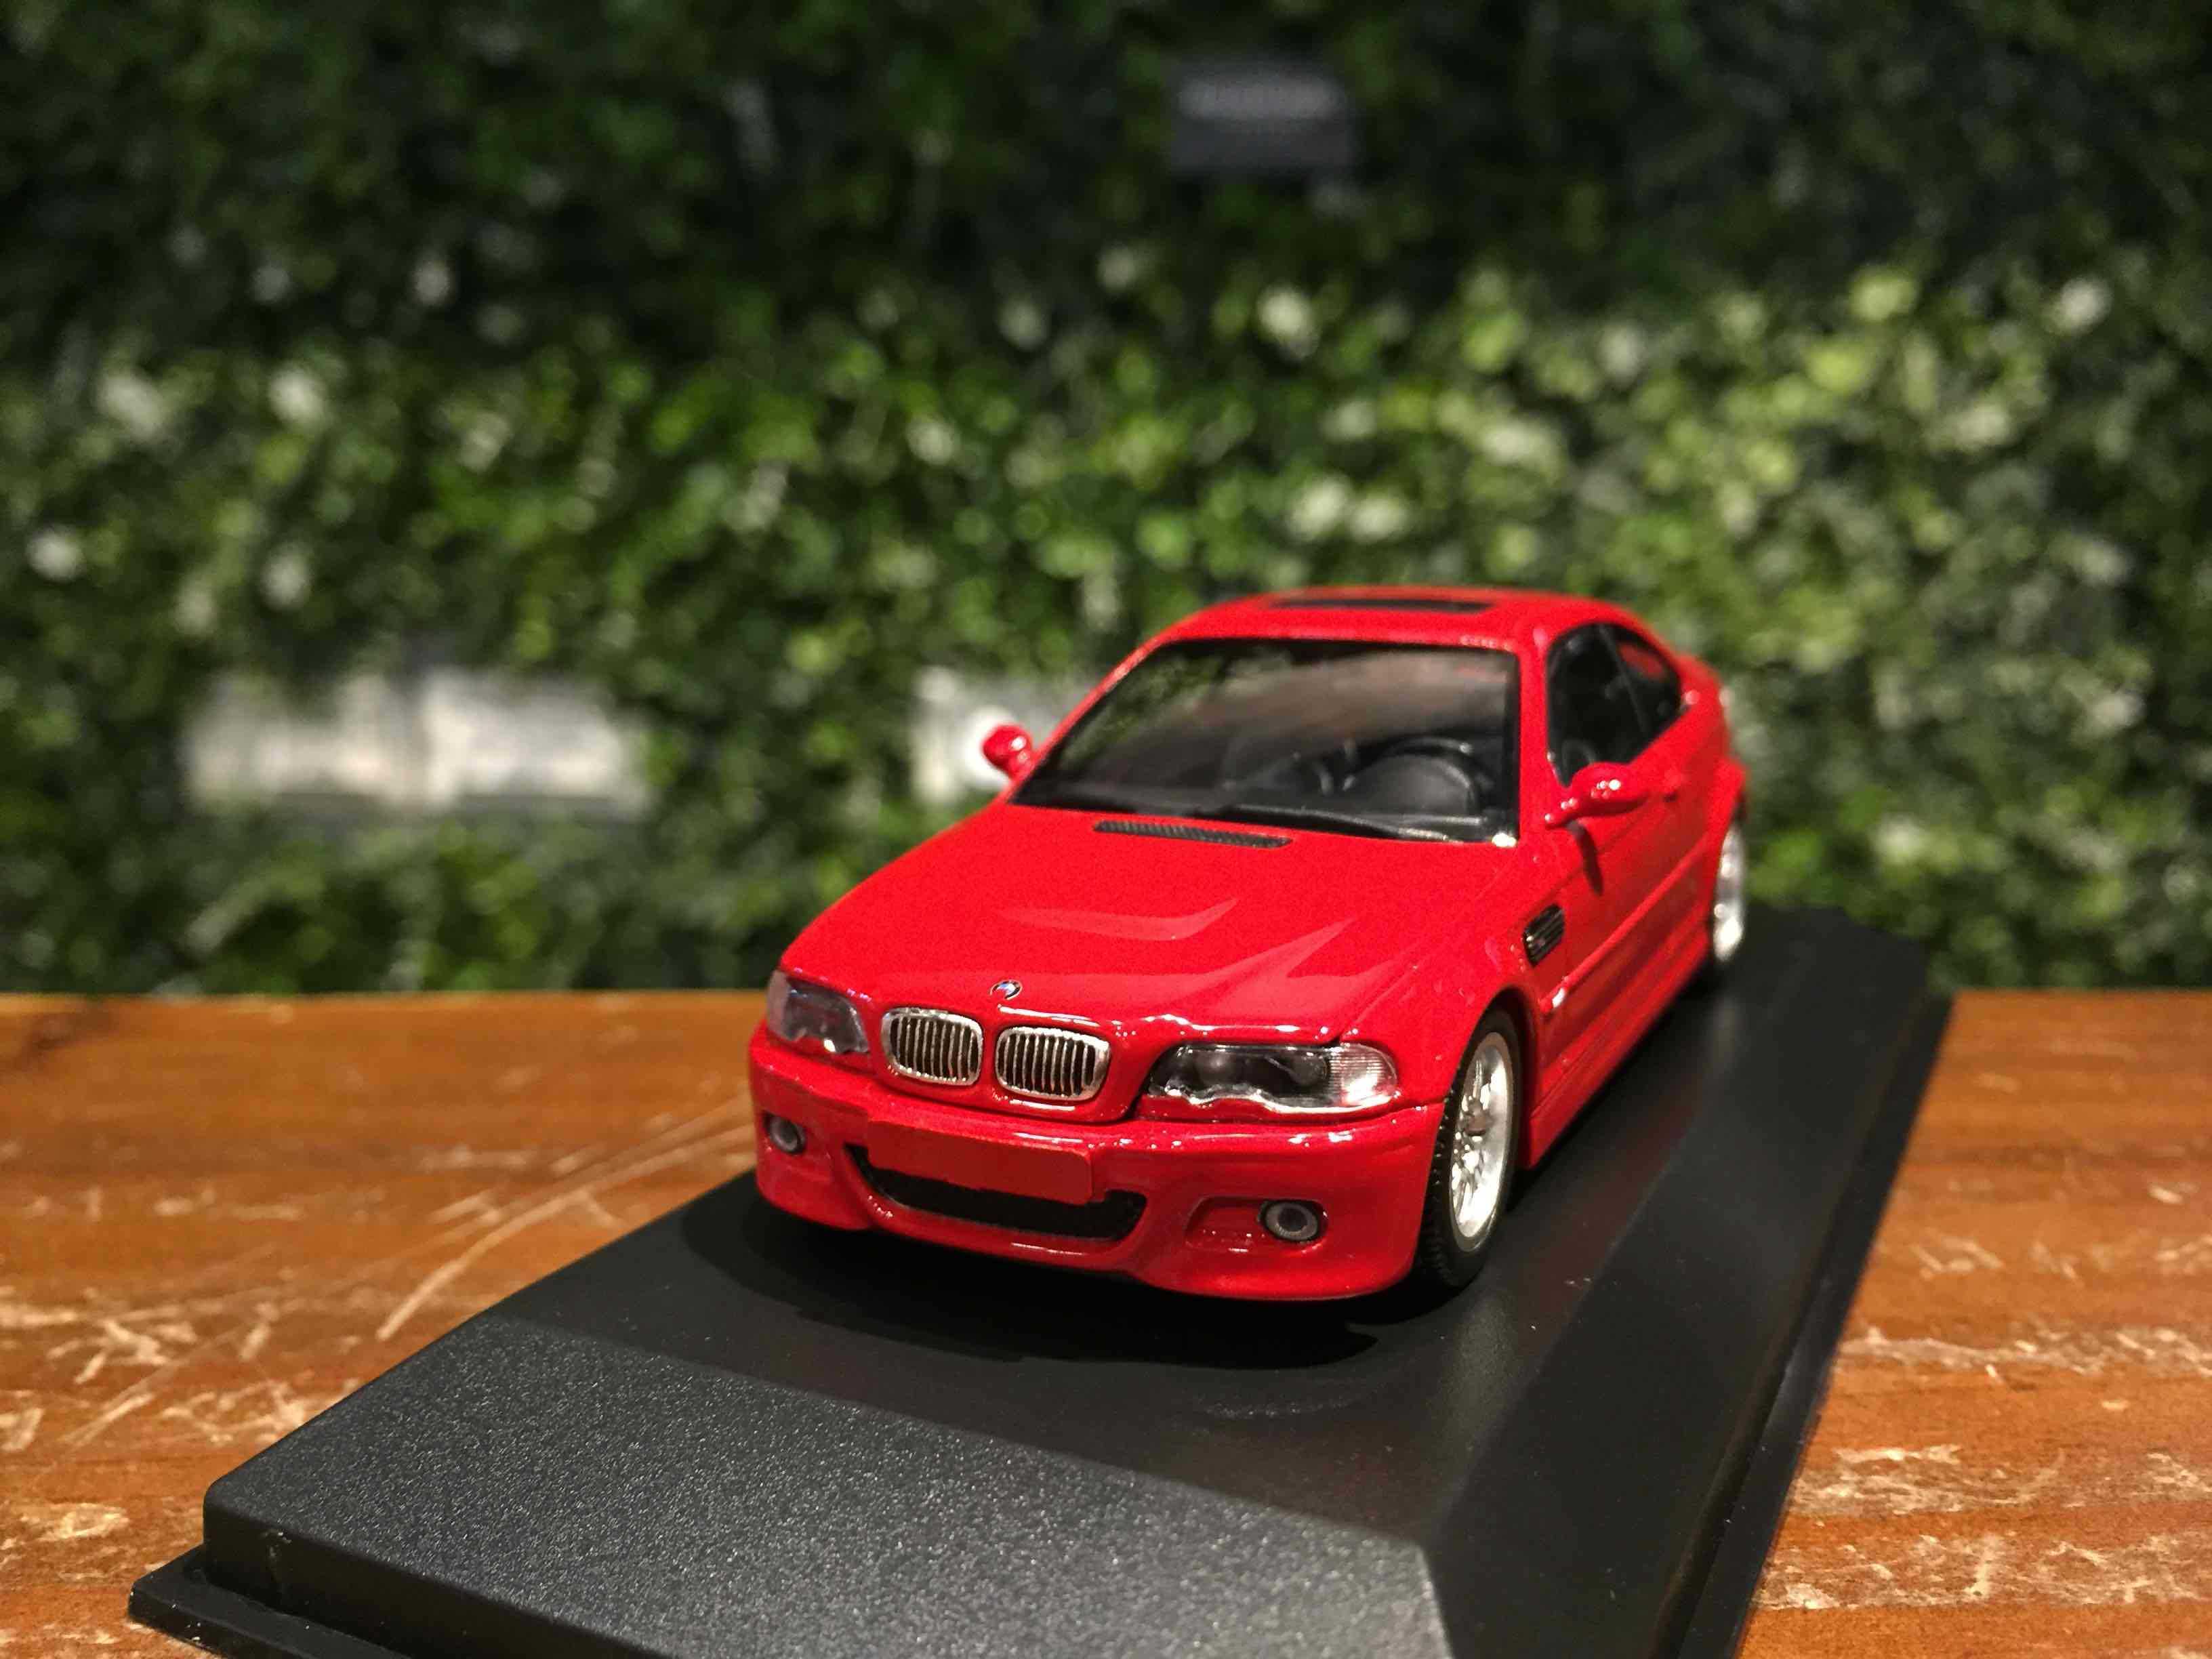 1/43 Minichamps BMW M3 (E46) Coupe 2001 Red 940020020【MGM】